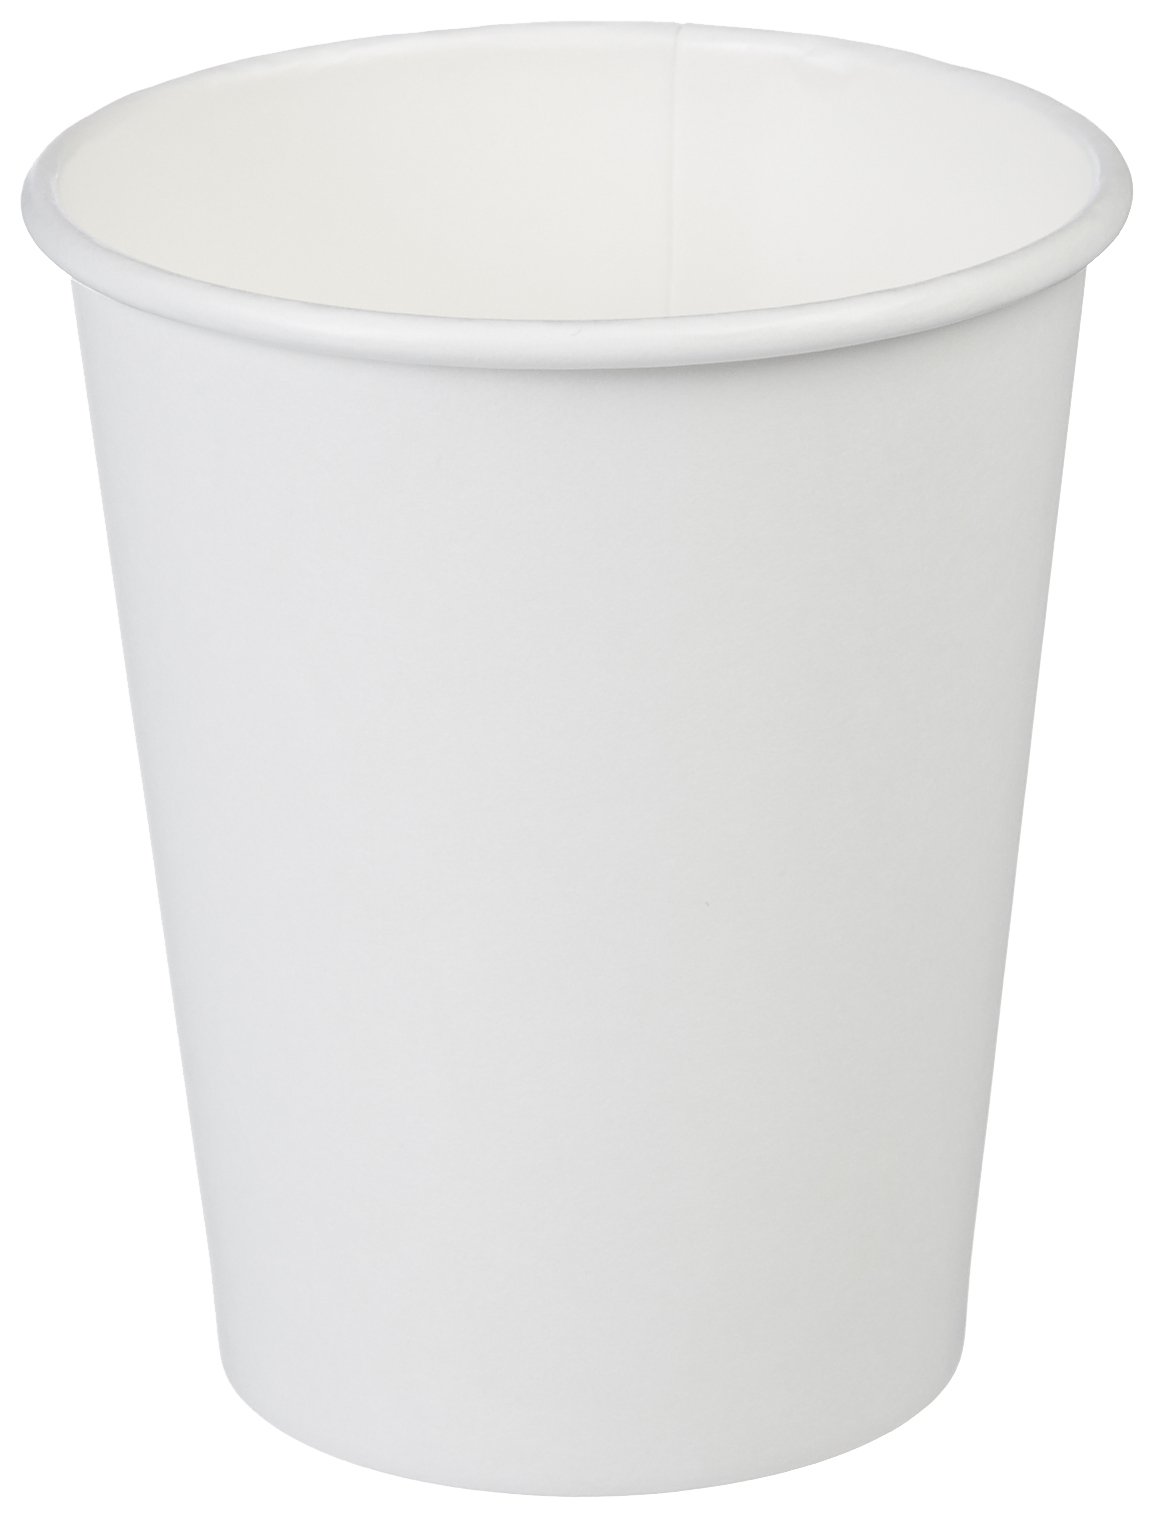 Book Cover Amazon Basics Paper Hot Cup, 8 oz, 1000 Count, White 8.0 Oz 1000 Count (Pack of 1)